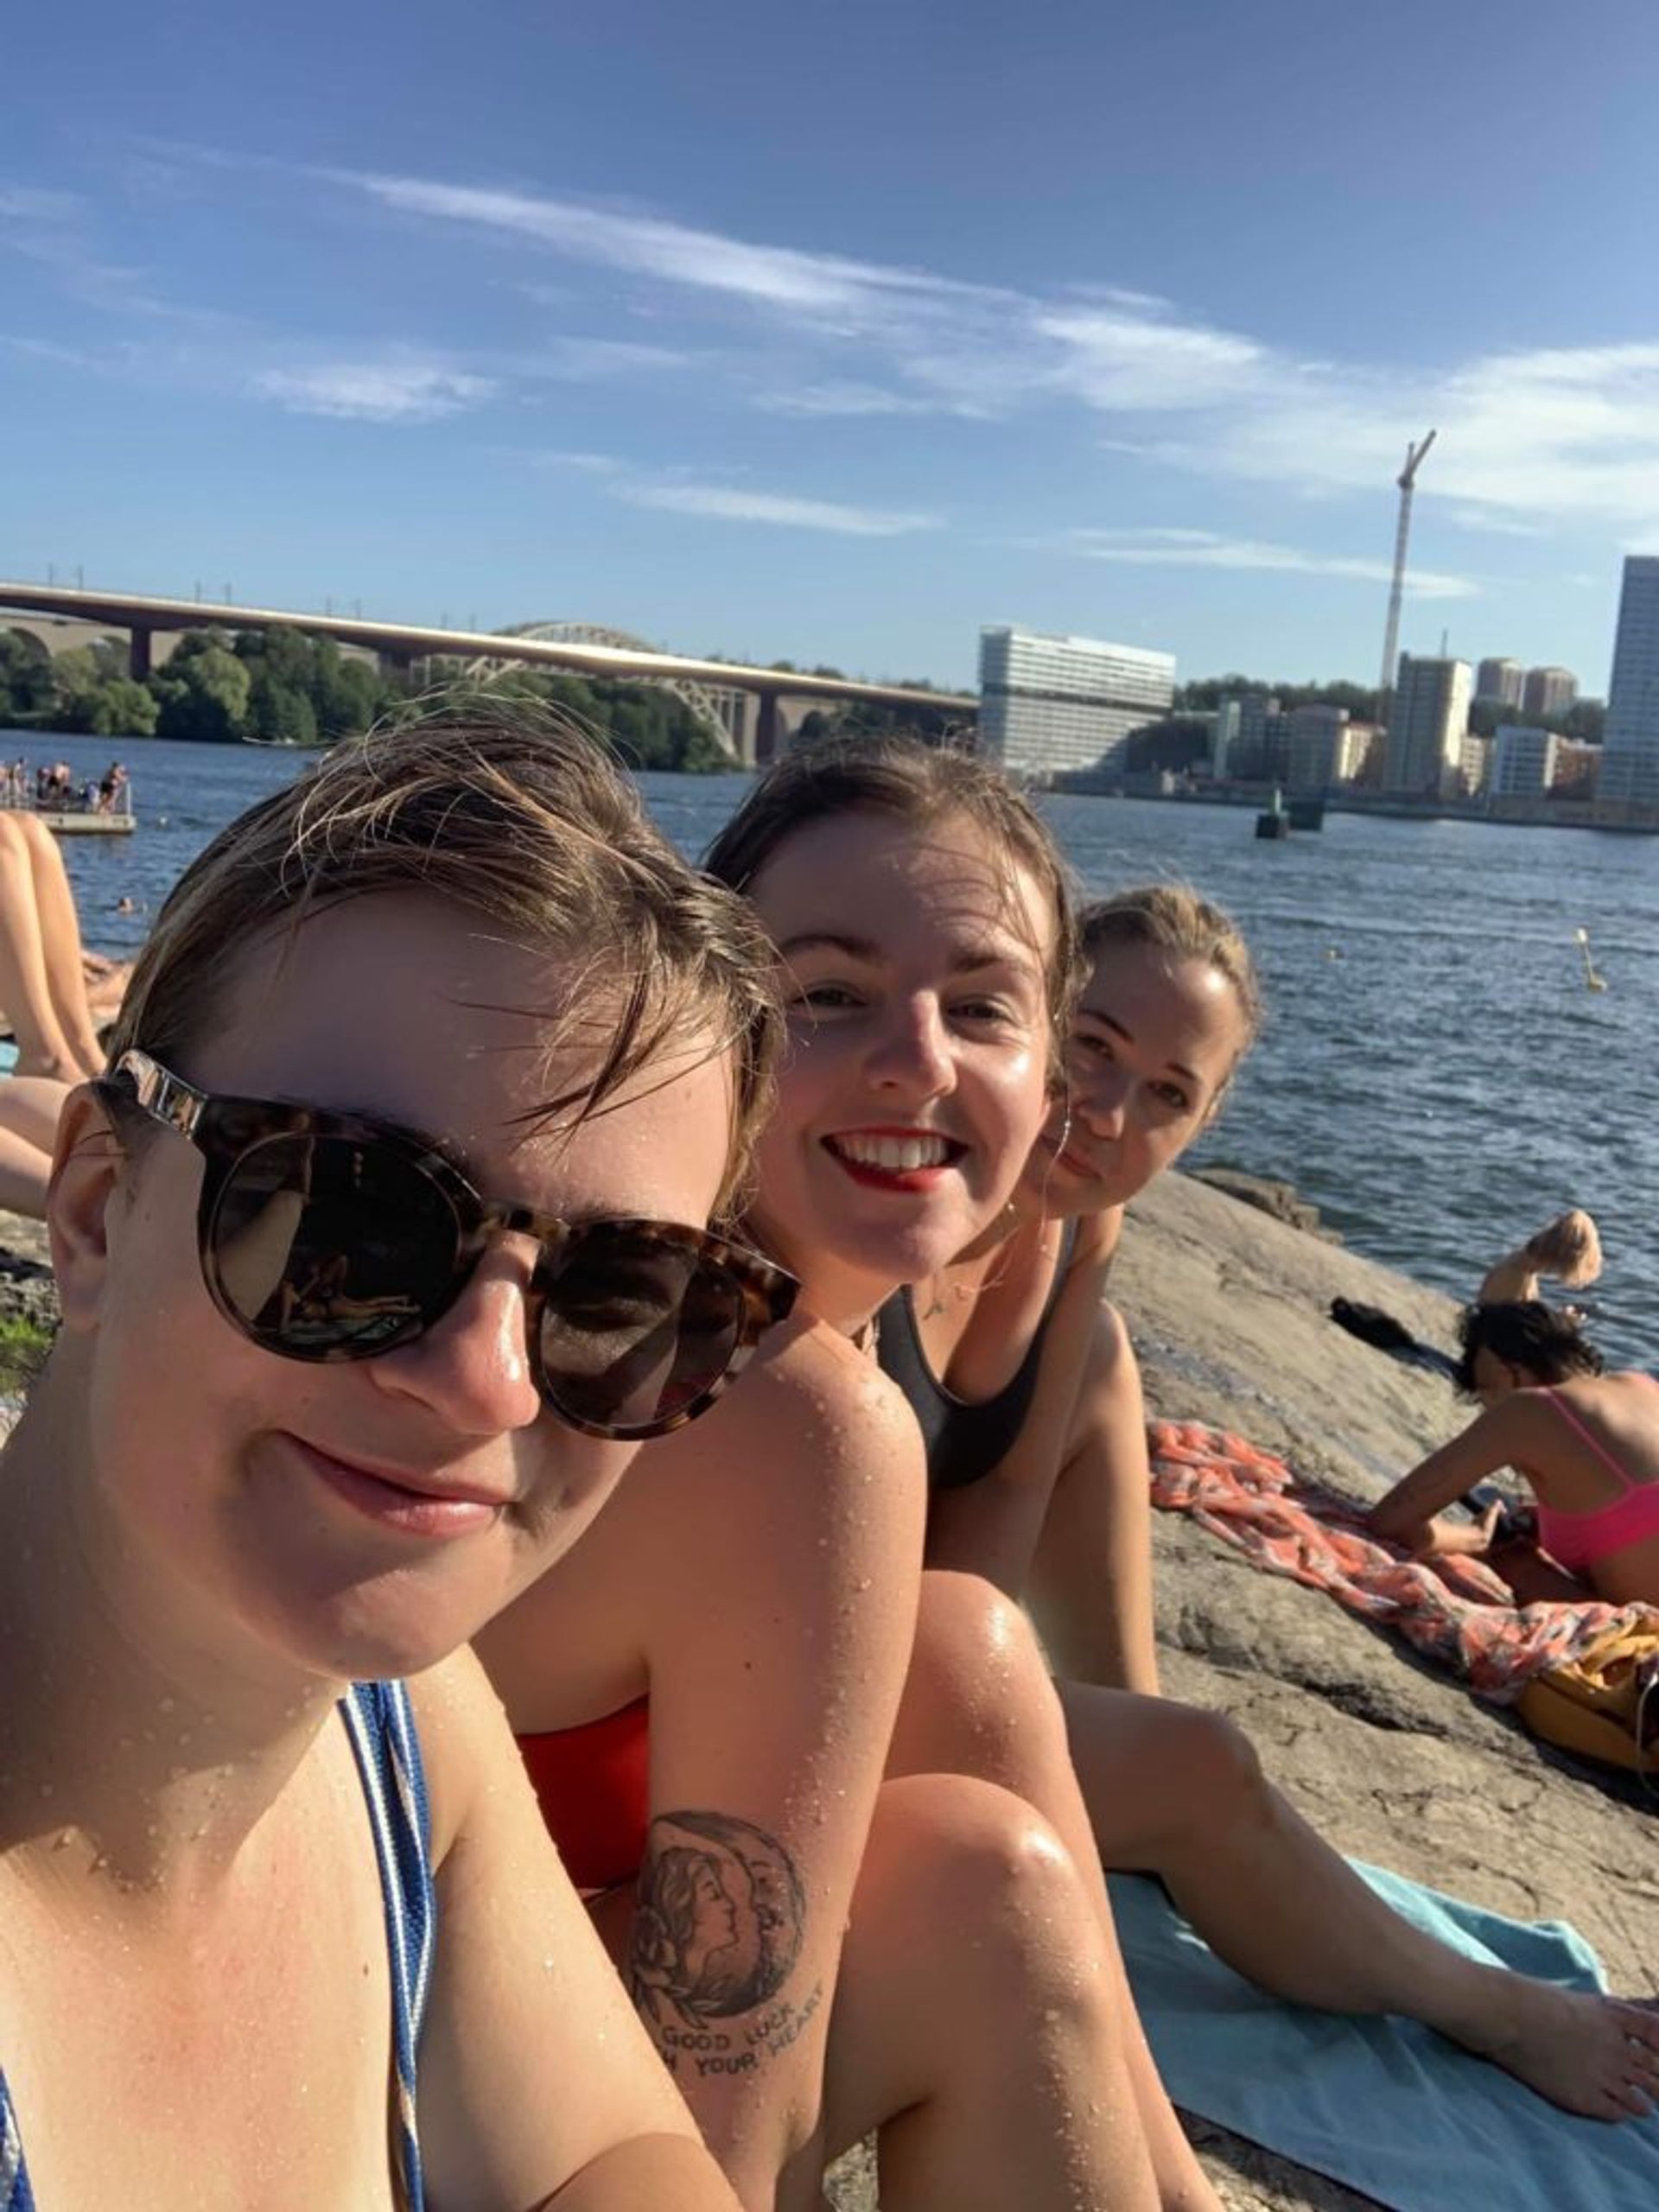 Friends after a swim, early September 2019